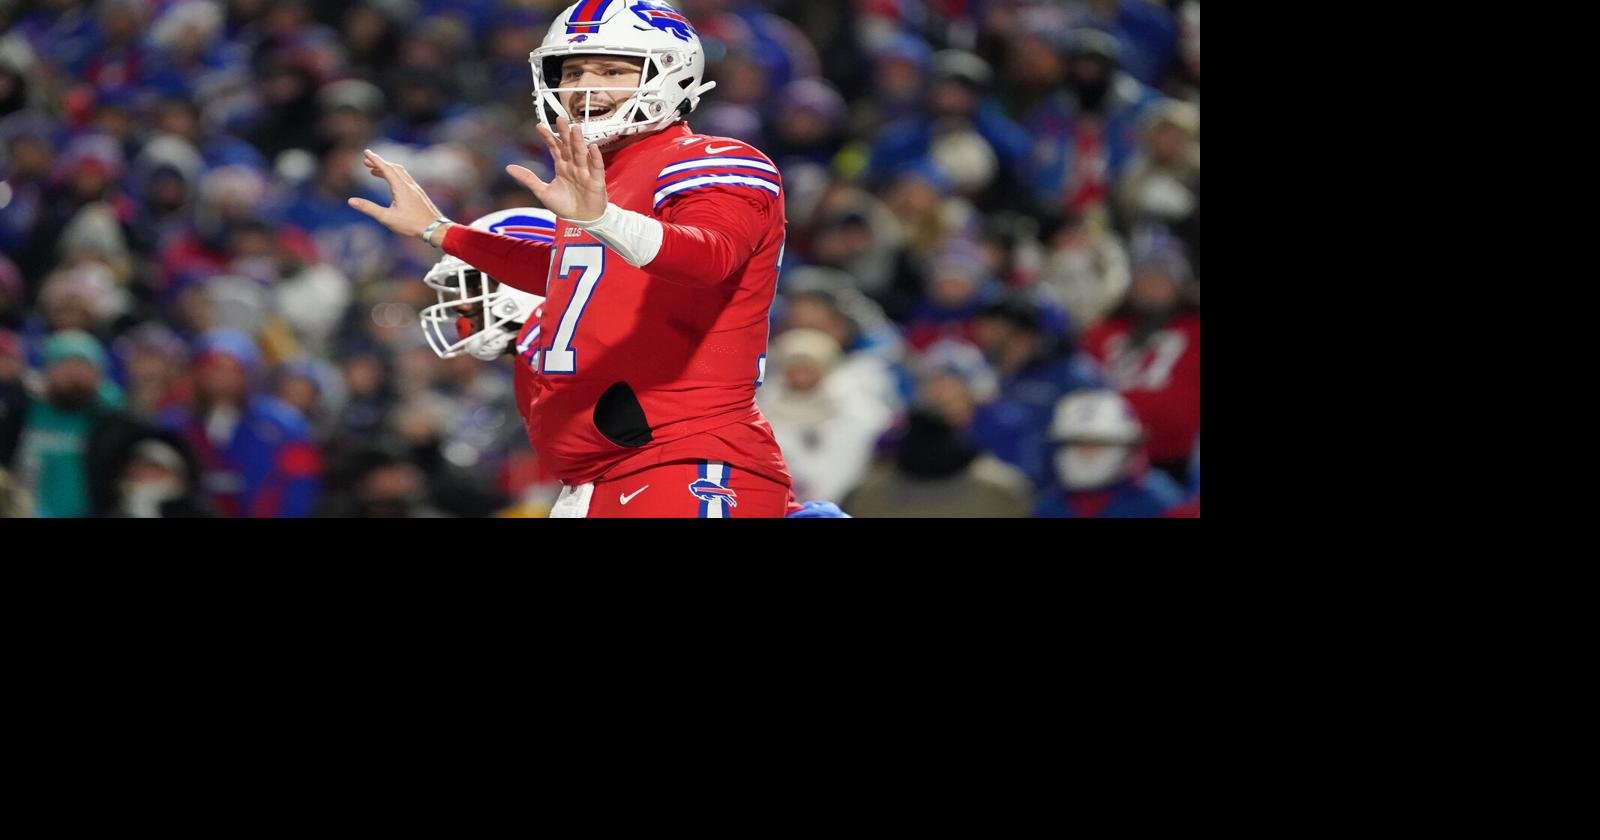 Buffalo Bills on X: QB Josh Allen: “It's officially win or go home, that's  what playoff football is all about. Our team is resilient and we know we're  going to leave everything